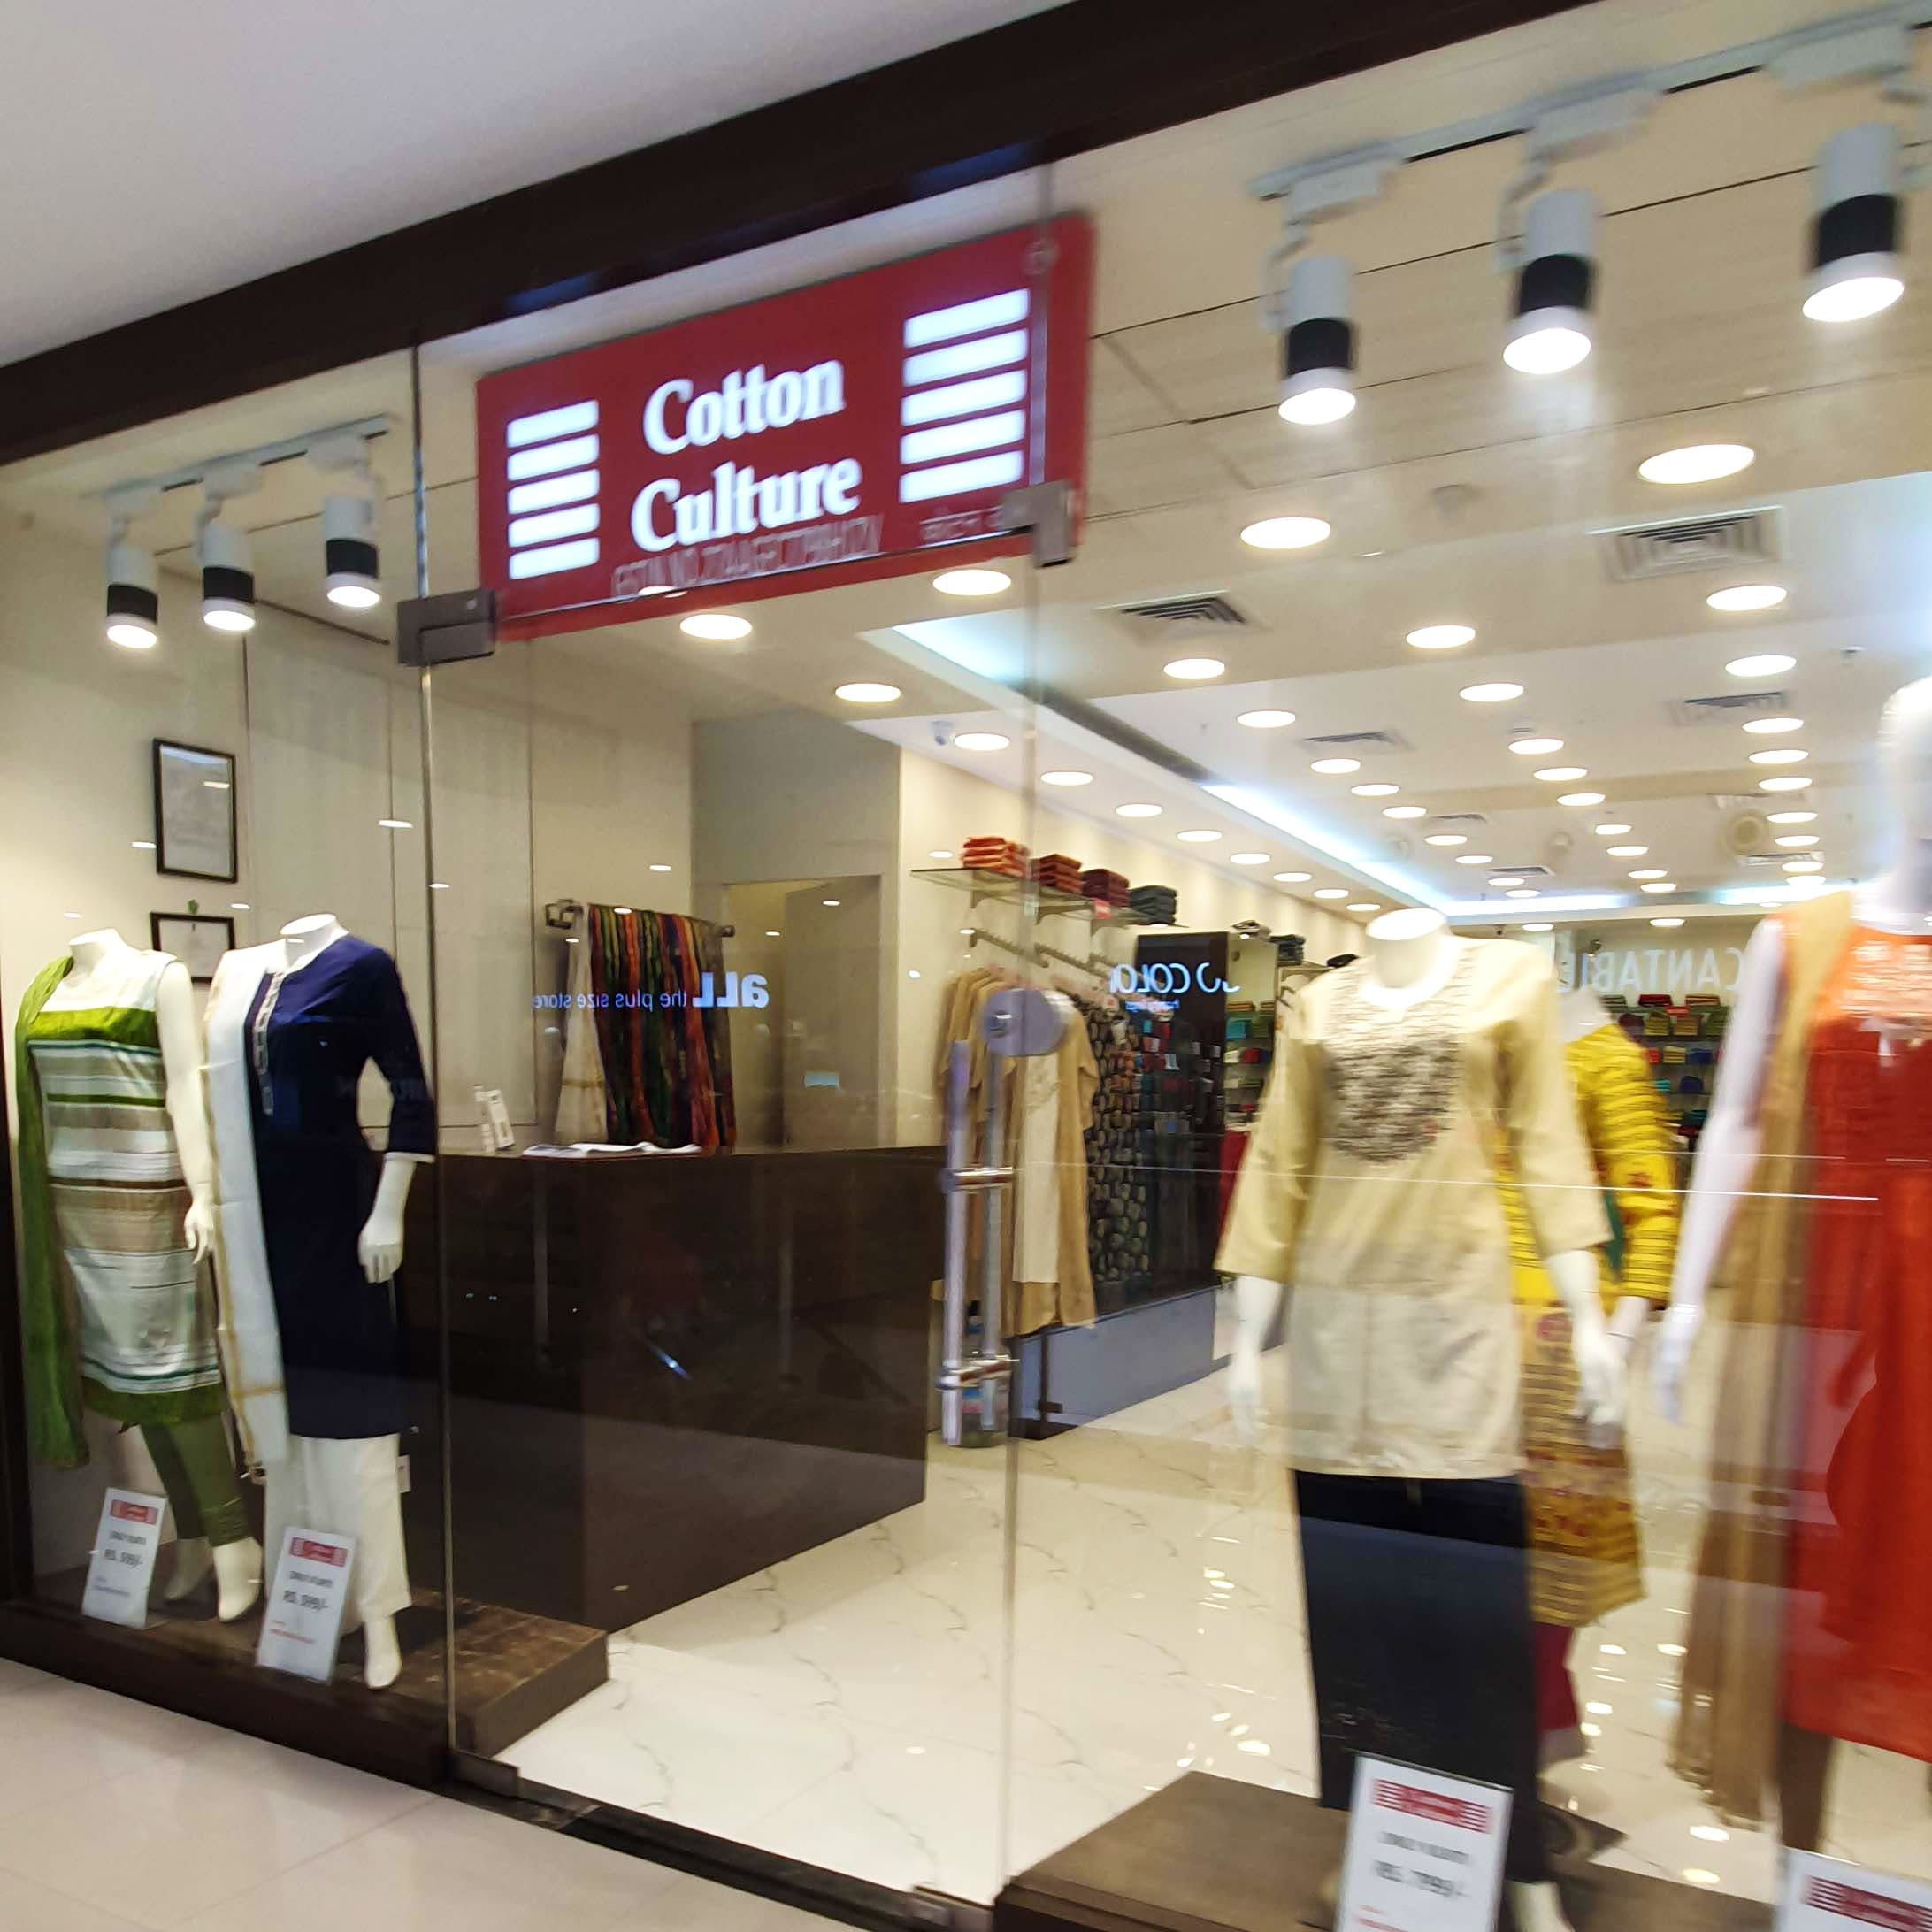 Outlet store,Boutique,Shopping mall,Building,Retail,Shopping,Interior design,Display window